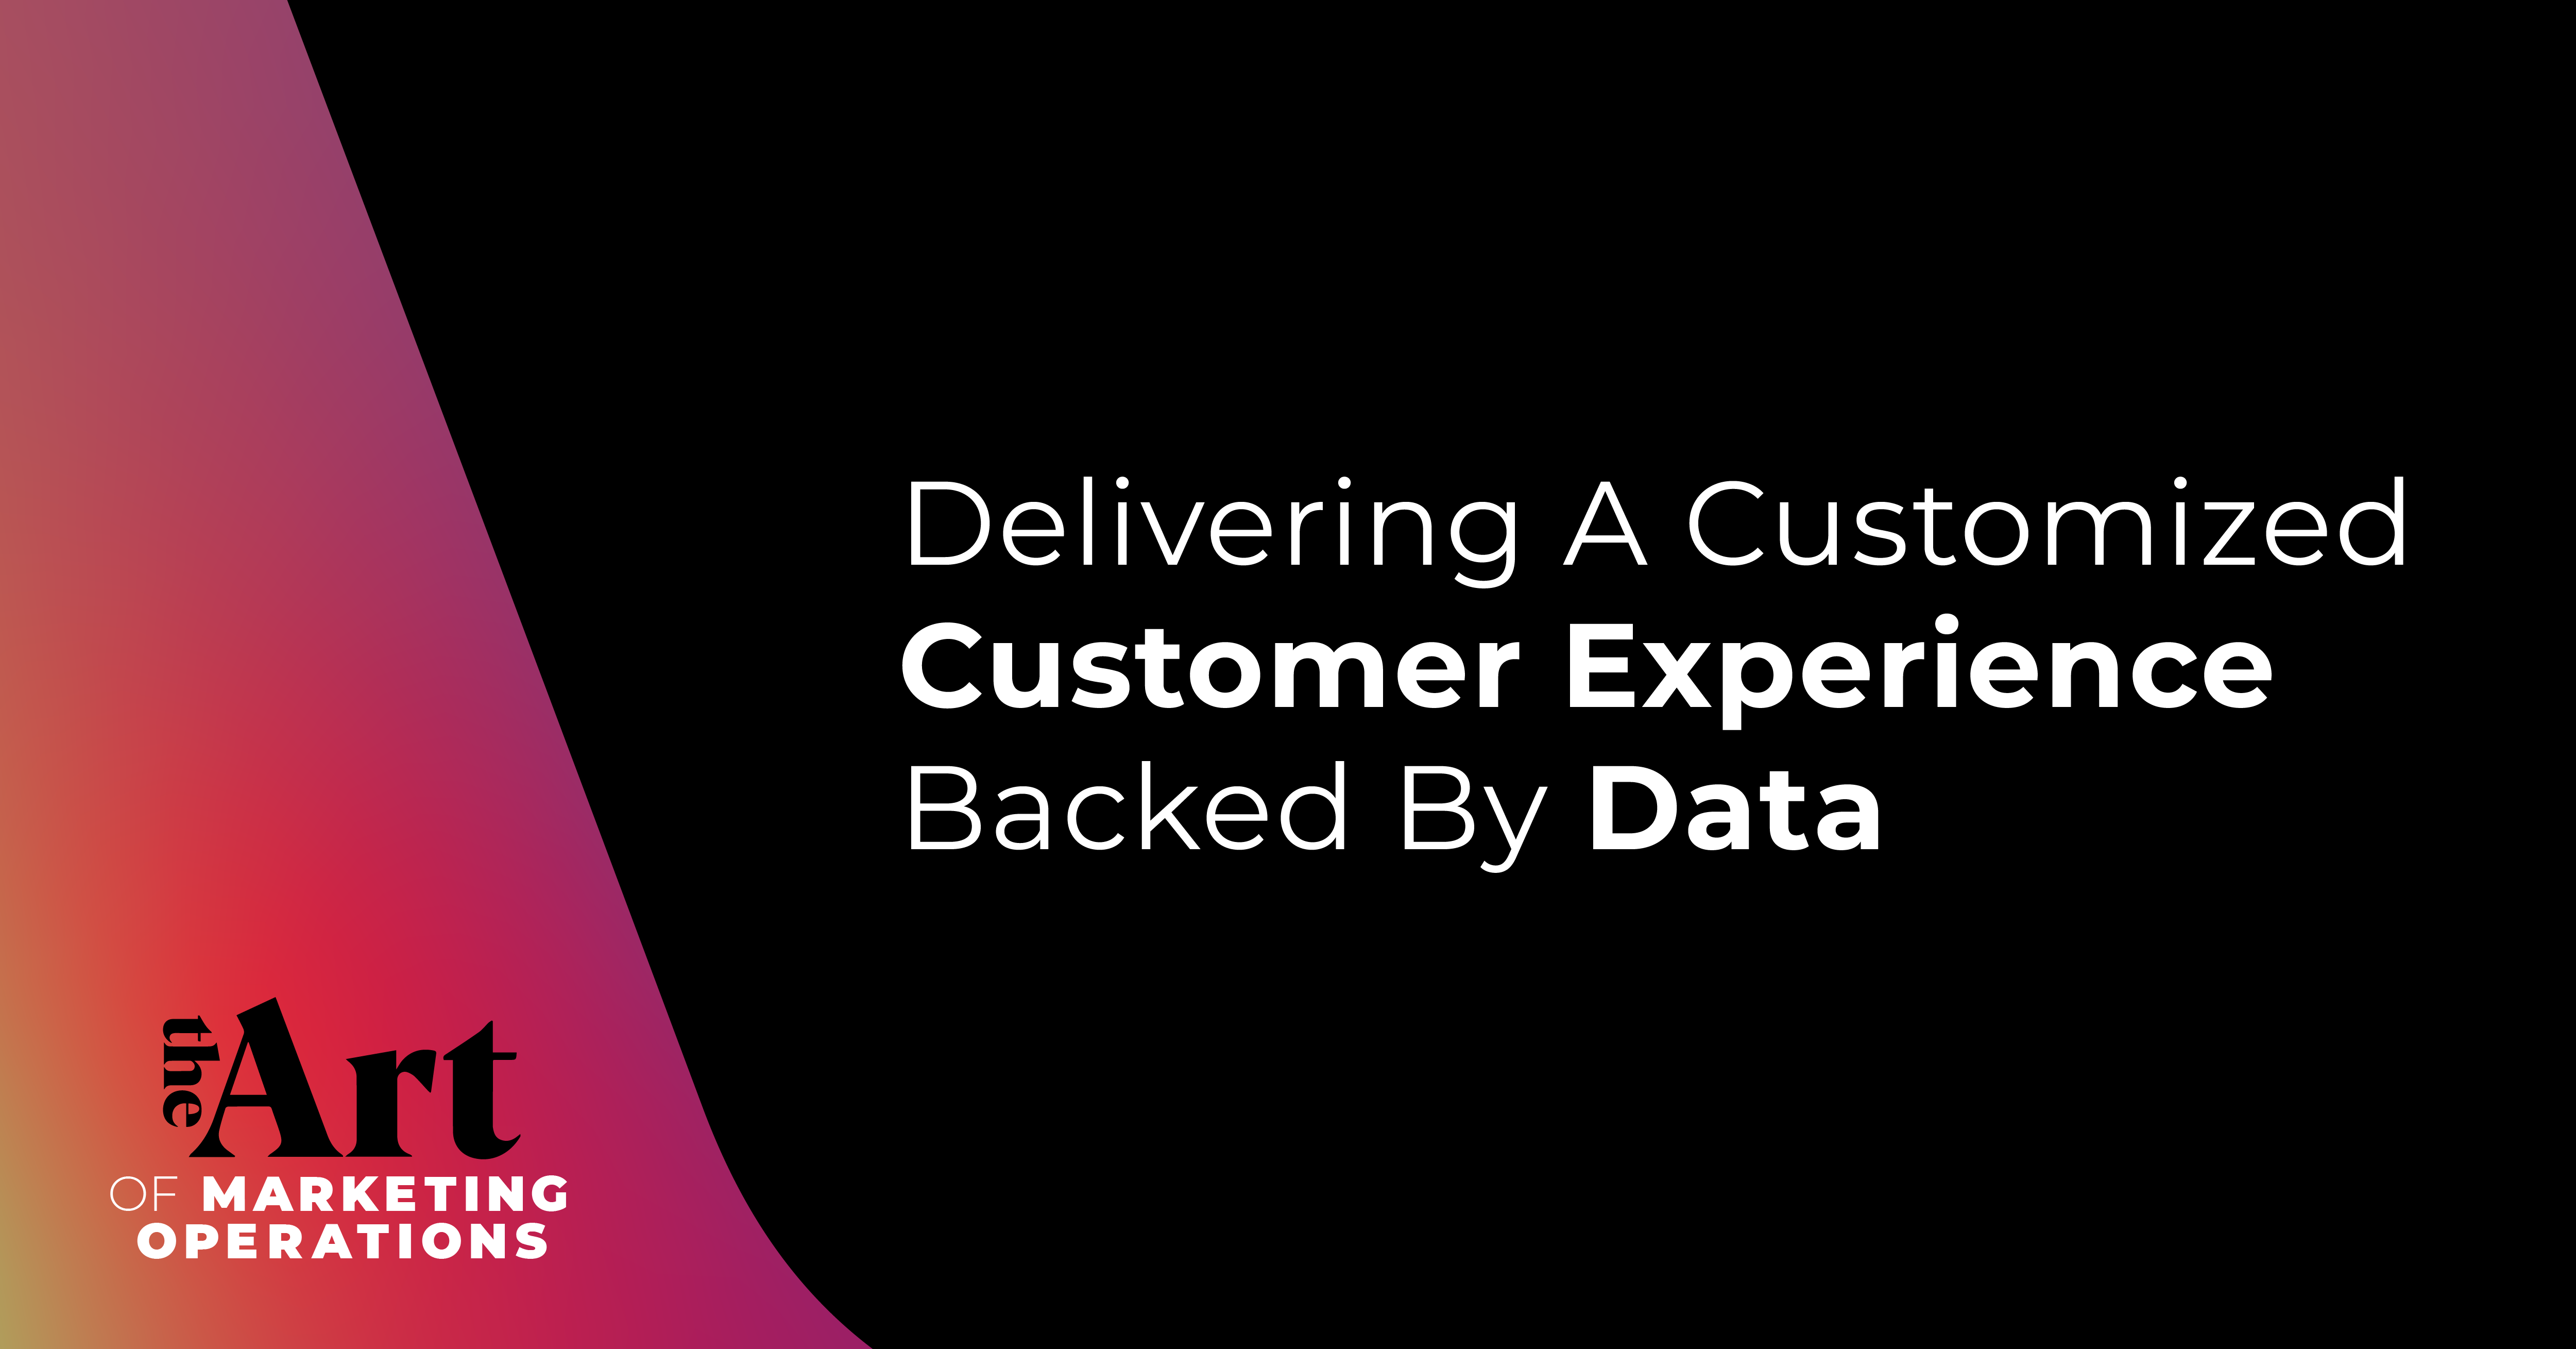 Featured image for article: Ep: 27 - Delivering A Customized Customer Experience Backed By Data